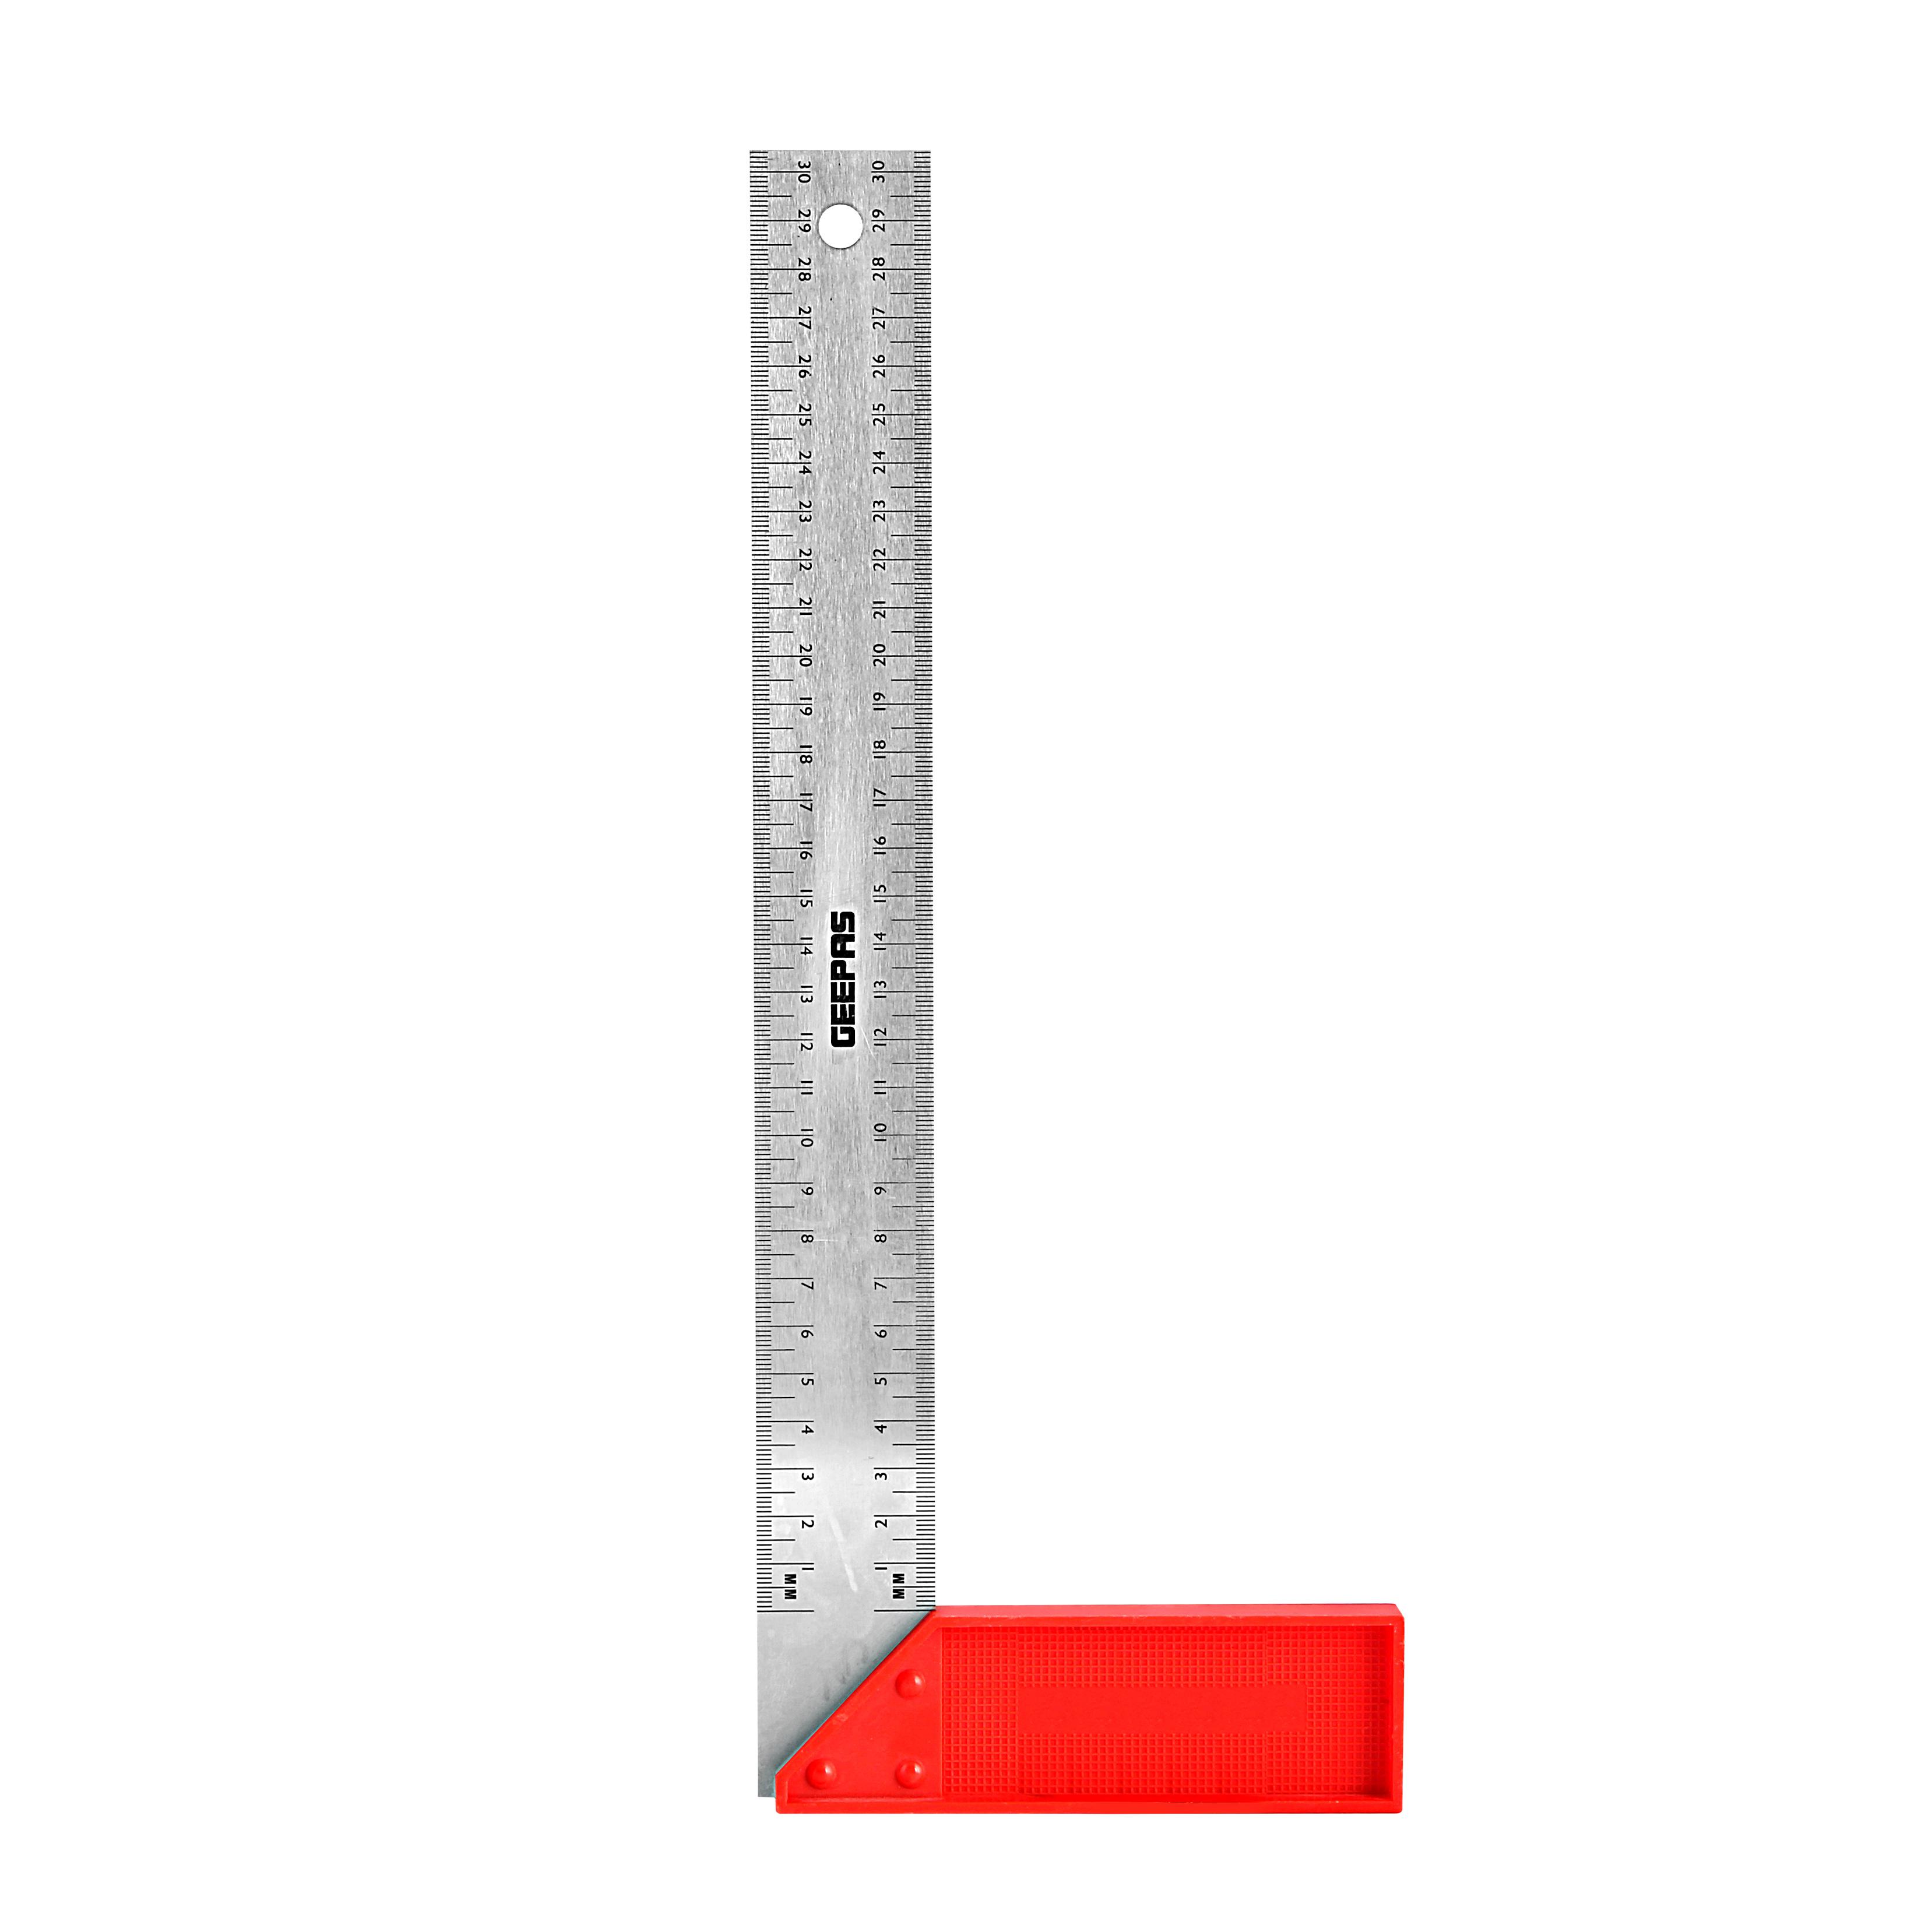 L-Square Ruler, Durable Try Square, For Construction Marking Tools